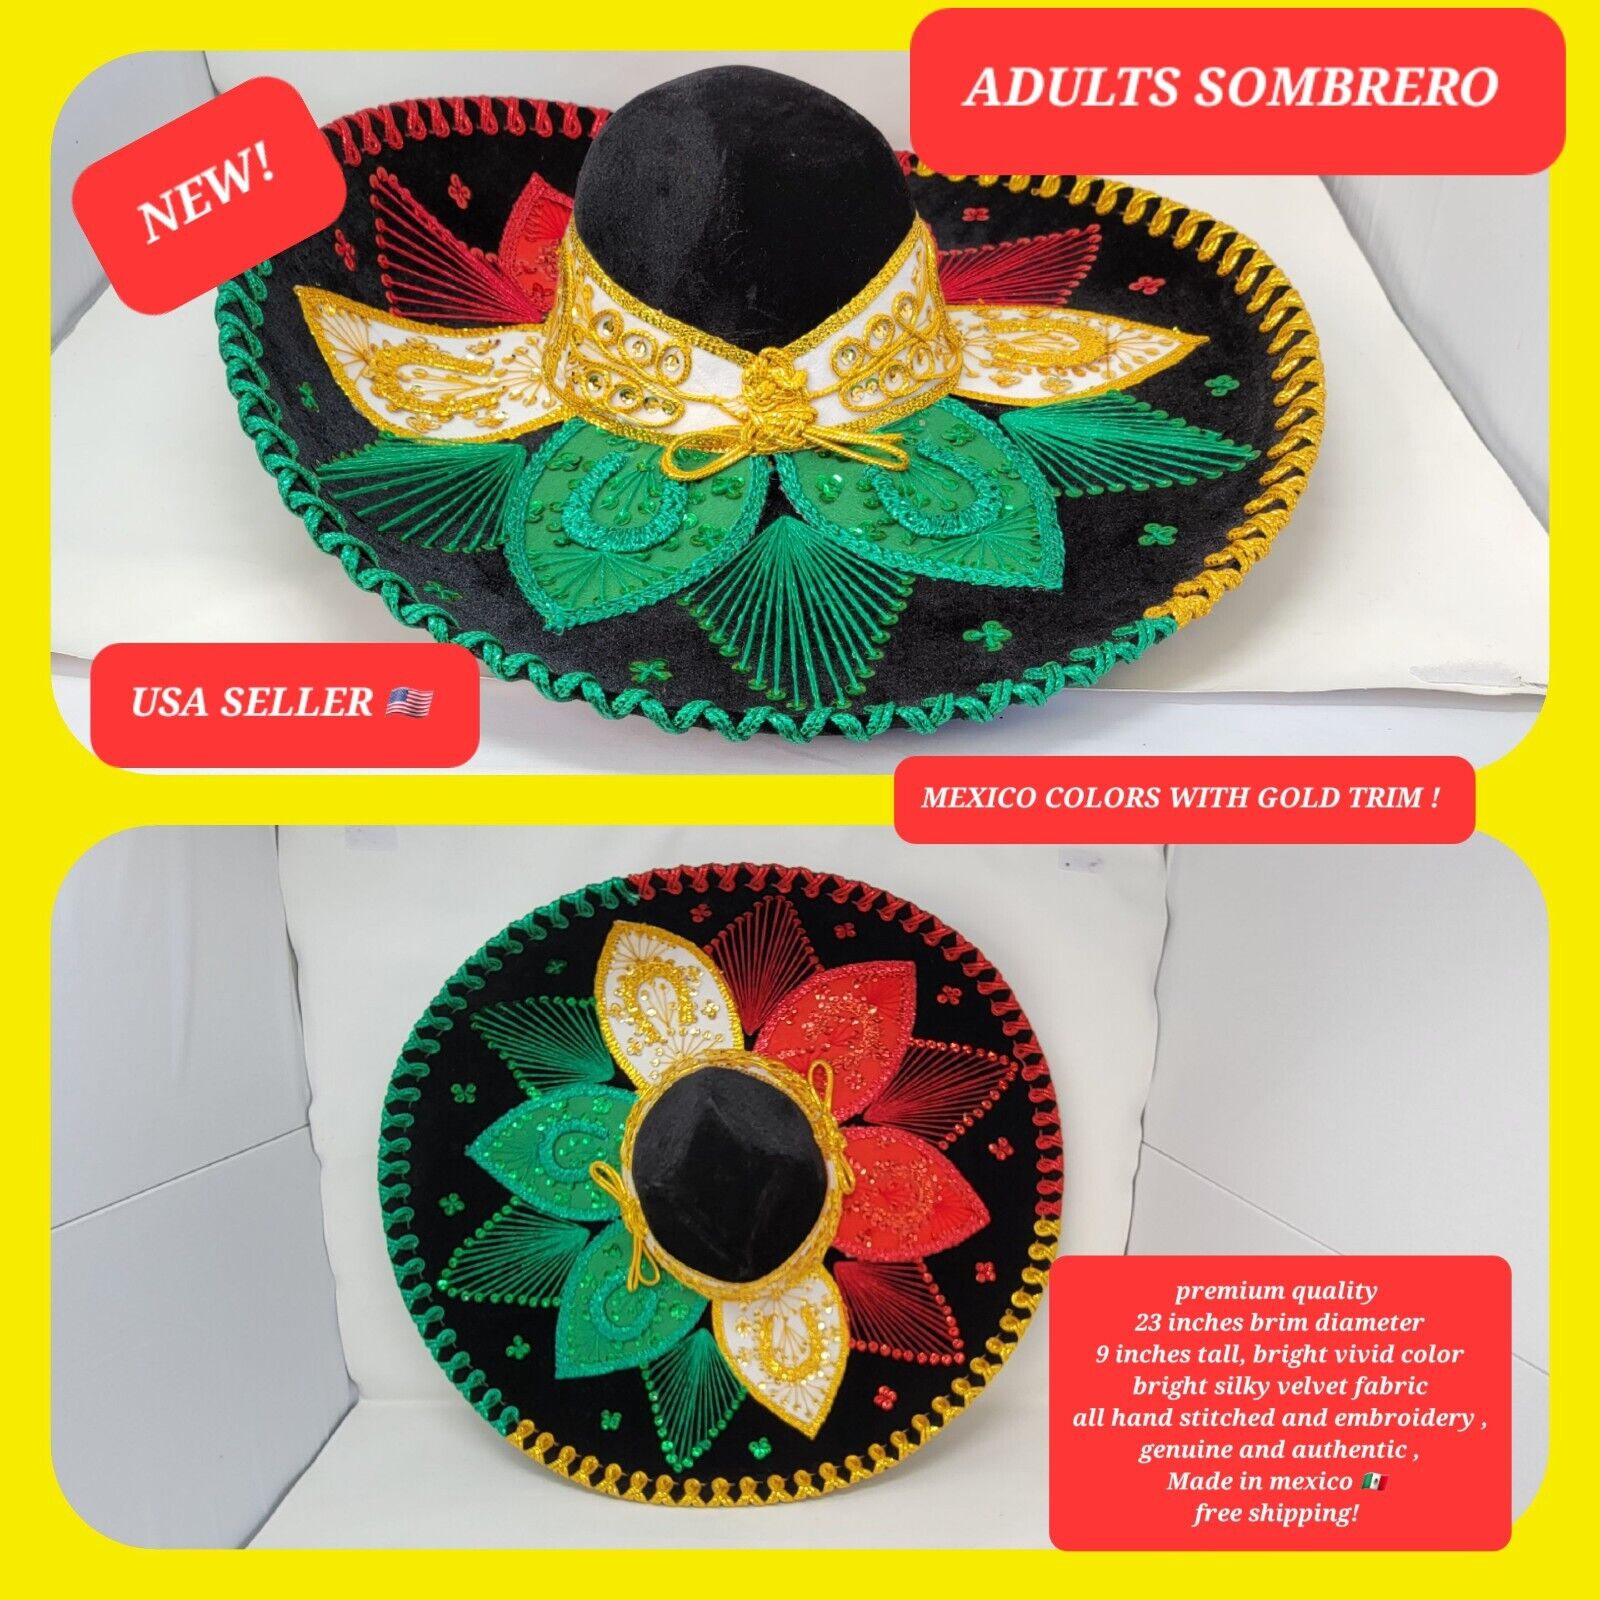 MEXICO COLORS with gold trim adults sombrero charro mariachi hat for fiestas